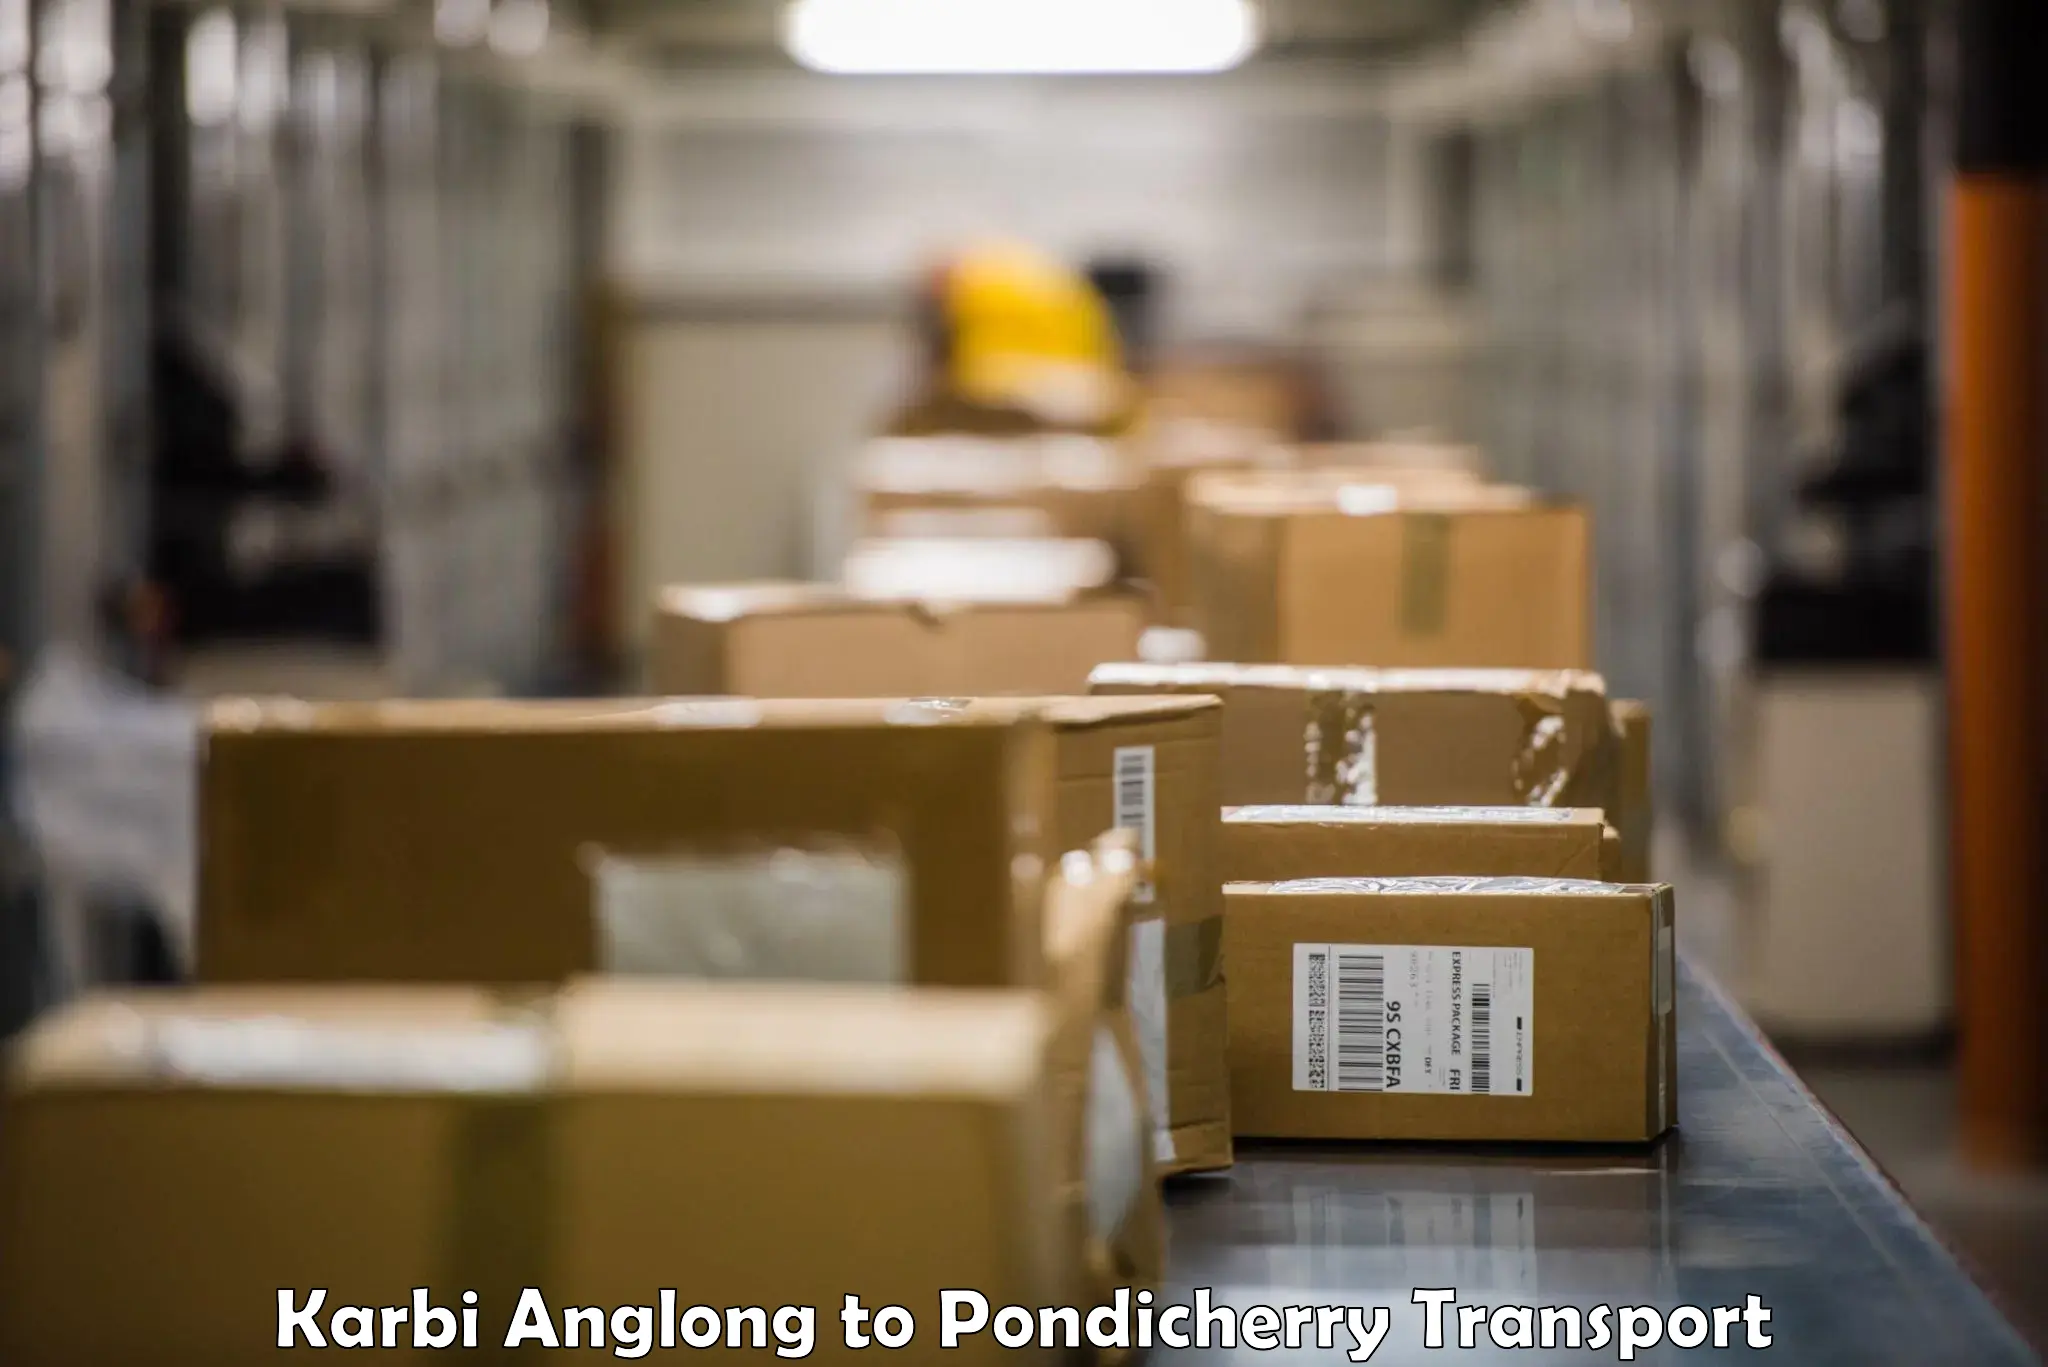 Domestic goods transportation services Karbi Anglong to Pondicherry